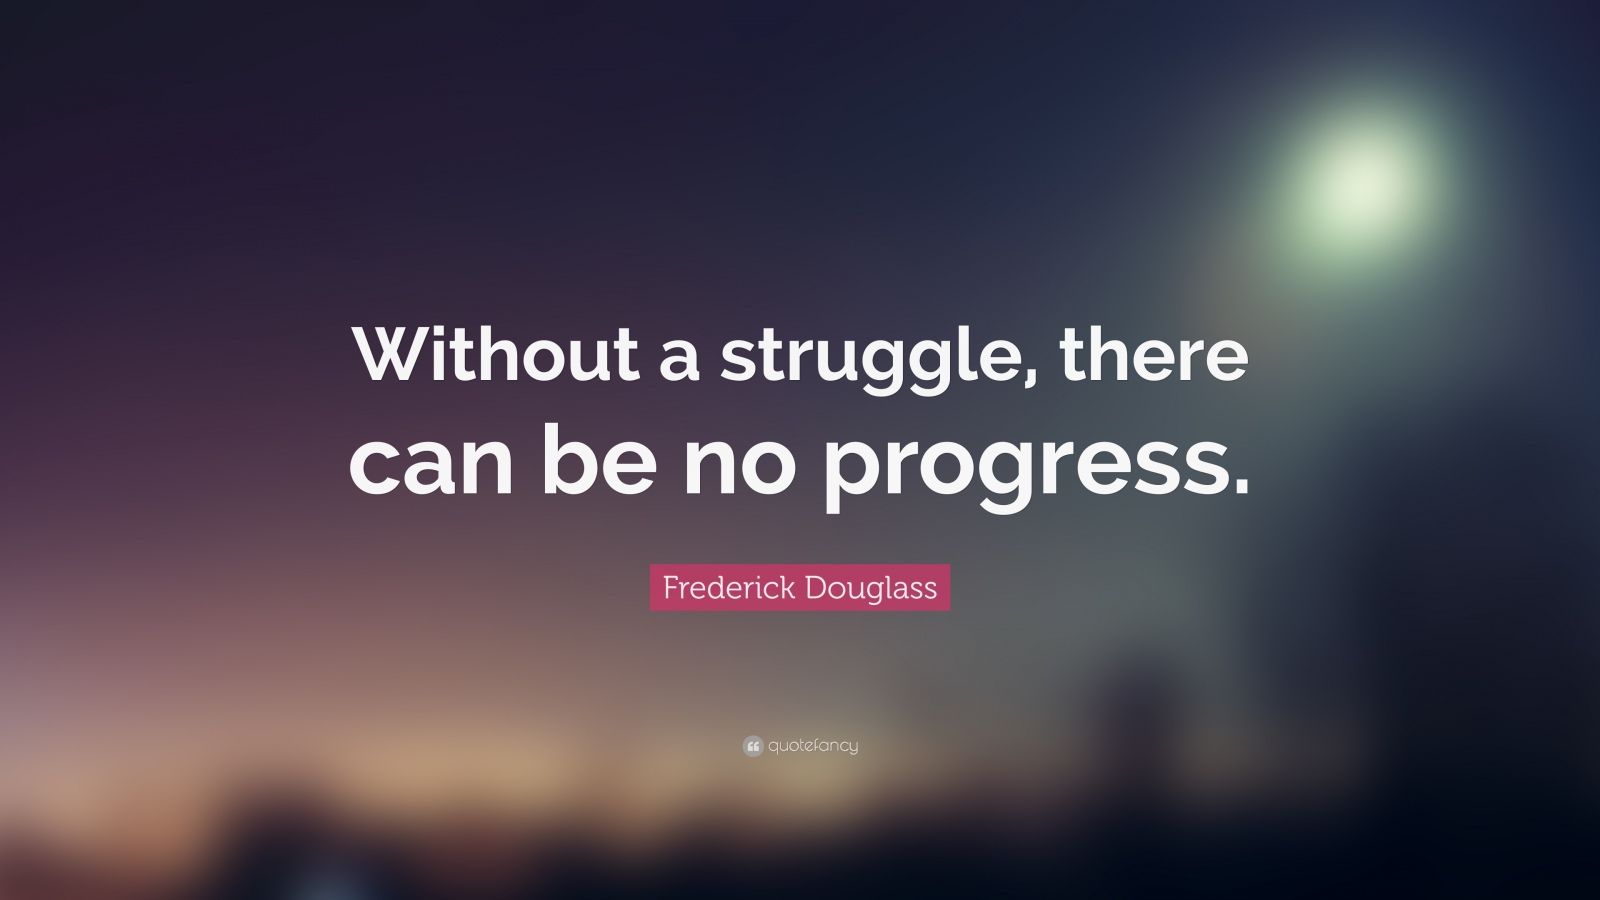 Frederick Douglass Quote: “Without a struggle, there can be no progress ...